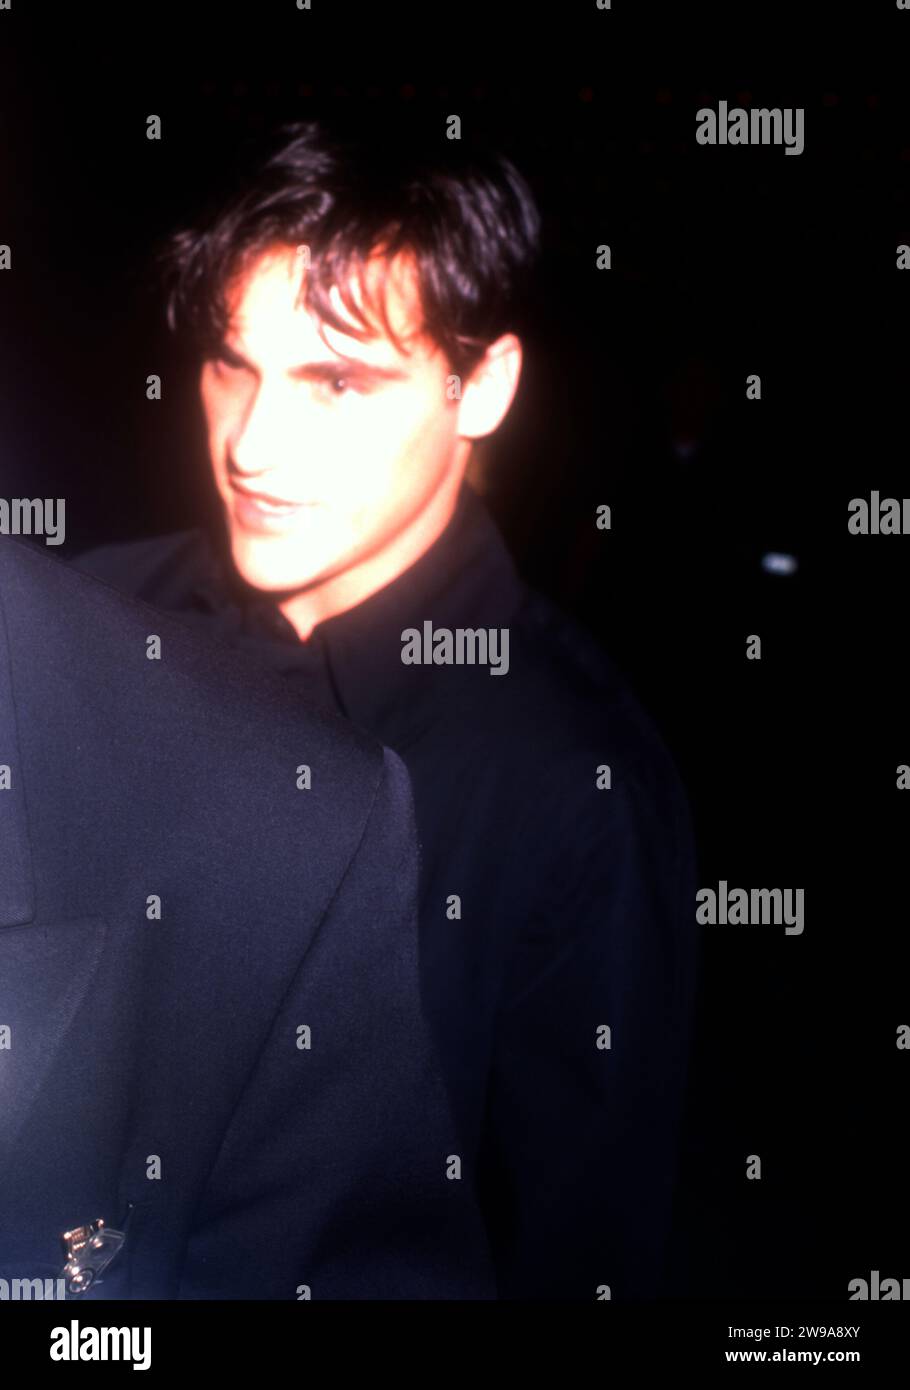 Century City, California, USA 30th September 1996 Actor Joaquin Phoenix attends 20th Century StudioÕs ÔThat Thing You DoÕ Premiere at Century City Cineplex Odeon Theaters on September 30, 1996 in Century City, California, USA. Photo by Barry King/Alamy Stock Photo Stock Photo